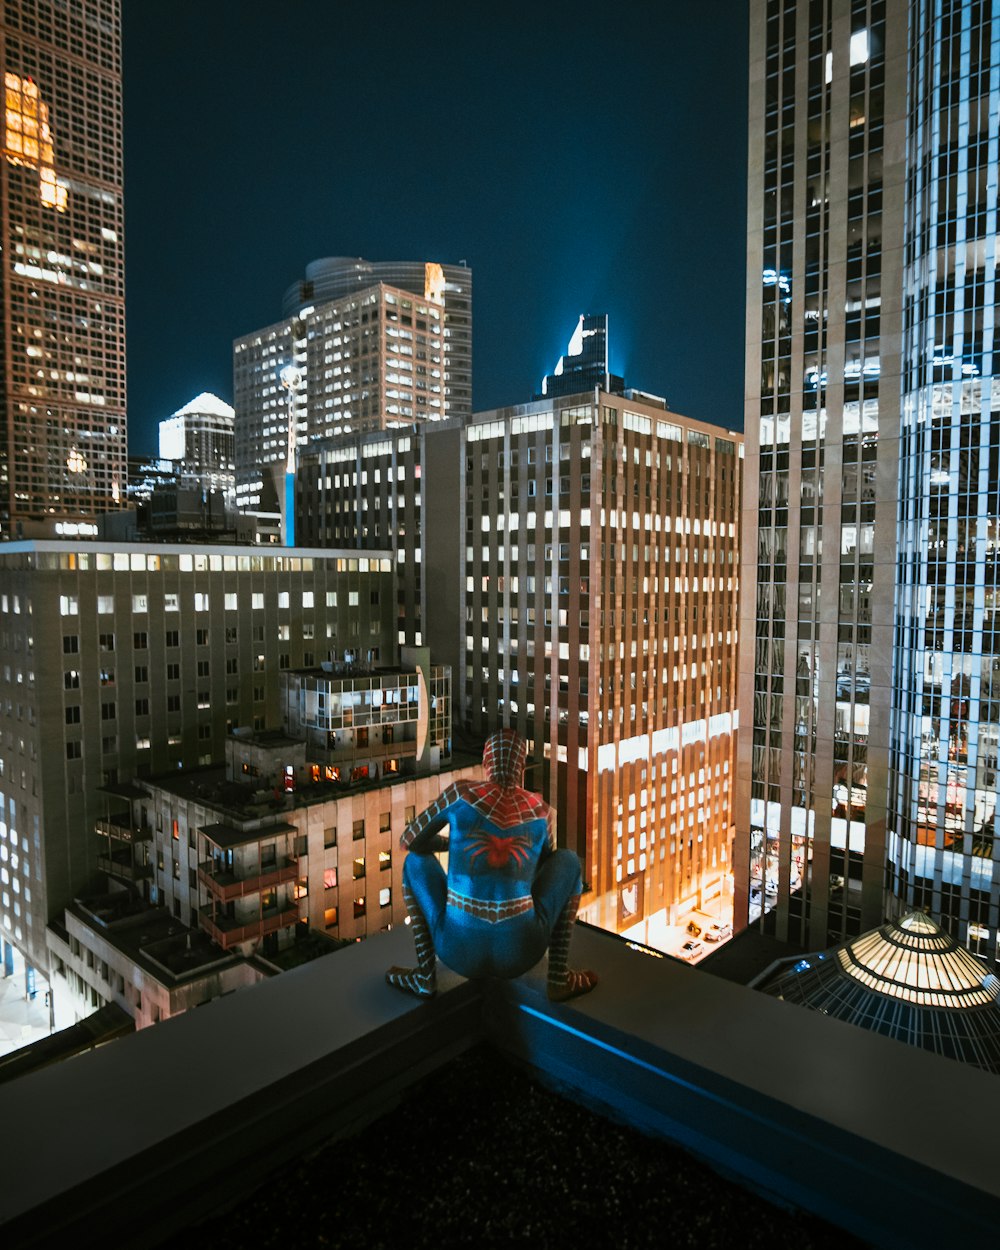 Spider-Man on rooftop